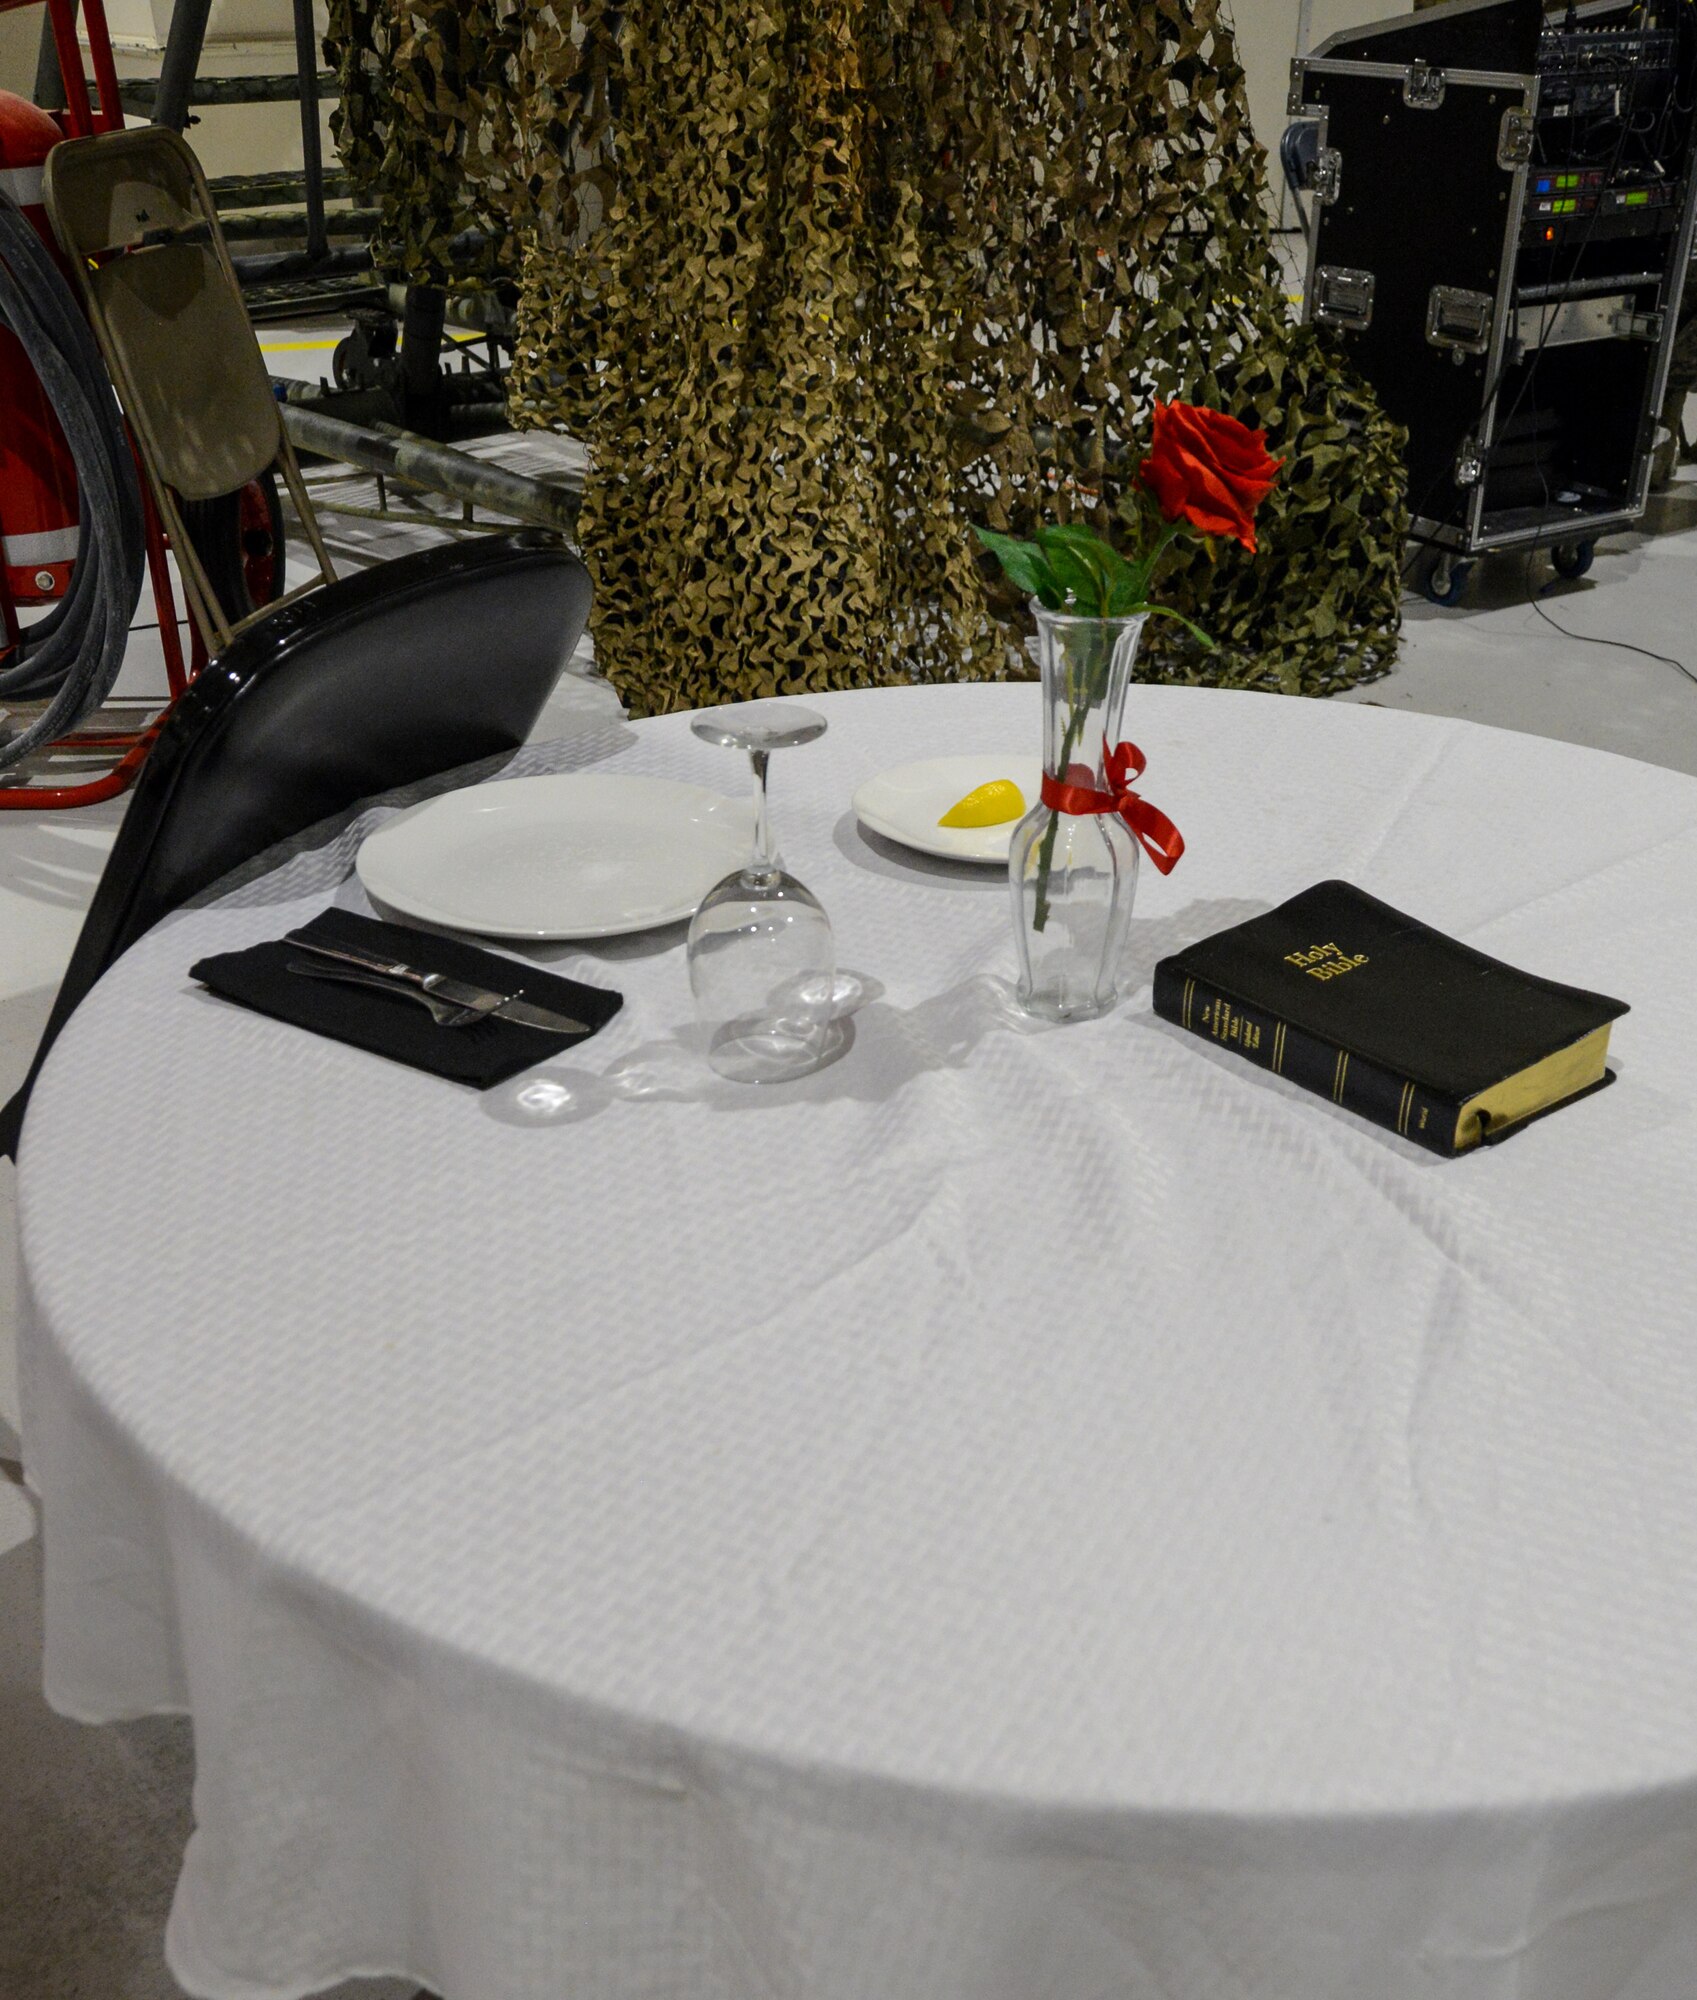 A table sits vacant in remembrance of Prisoners of War and Missing in Action. Included are an empty plate and glass, a lemon, a red rose, a Bible, and a chair in reservation.